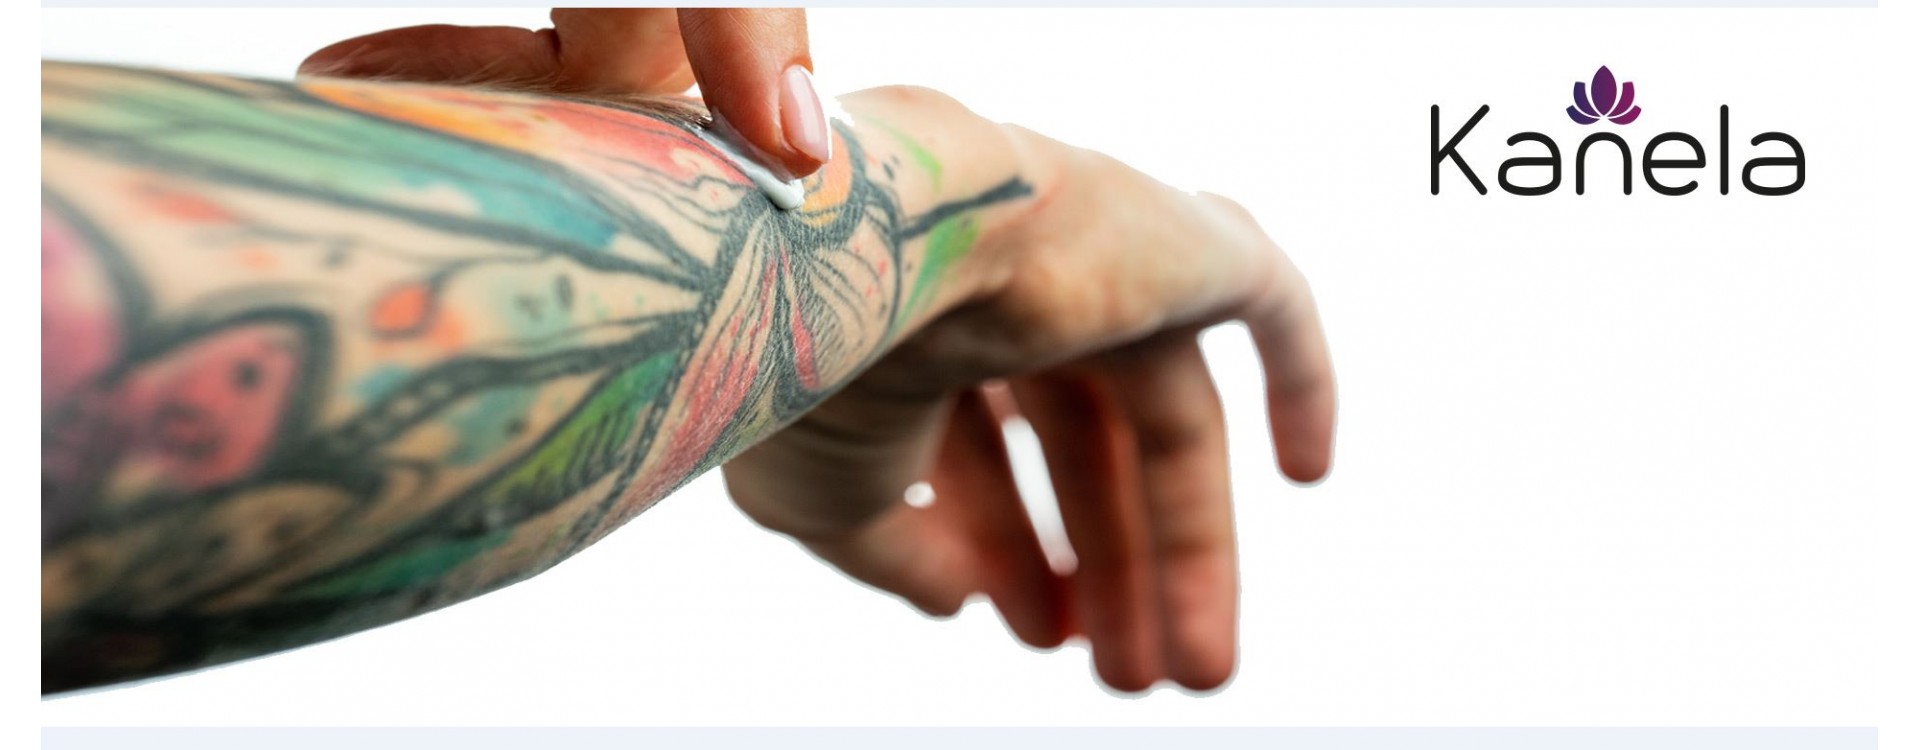 New tattoo? See how you can take care of the skin after a tattoo